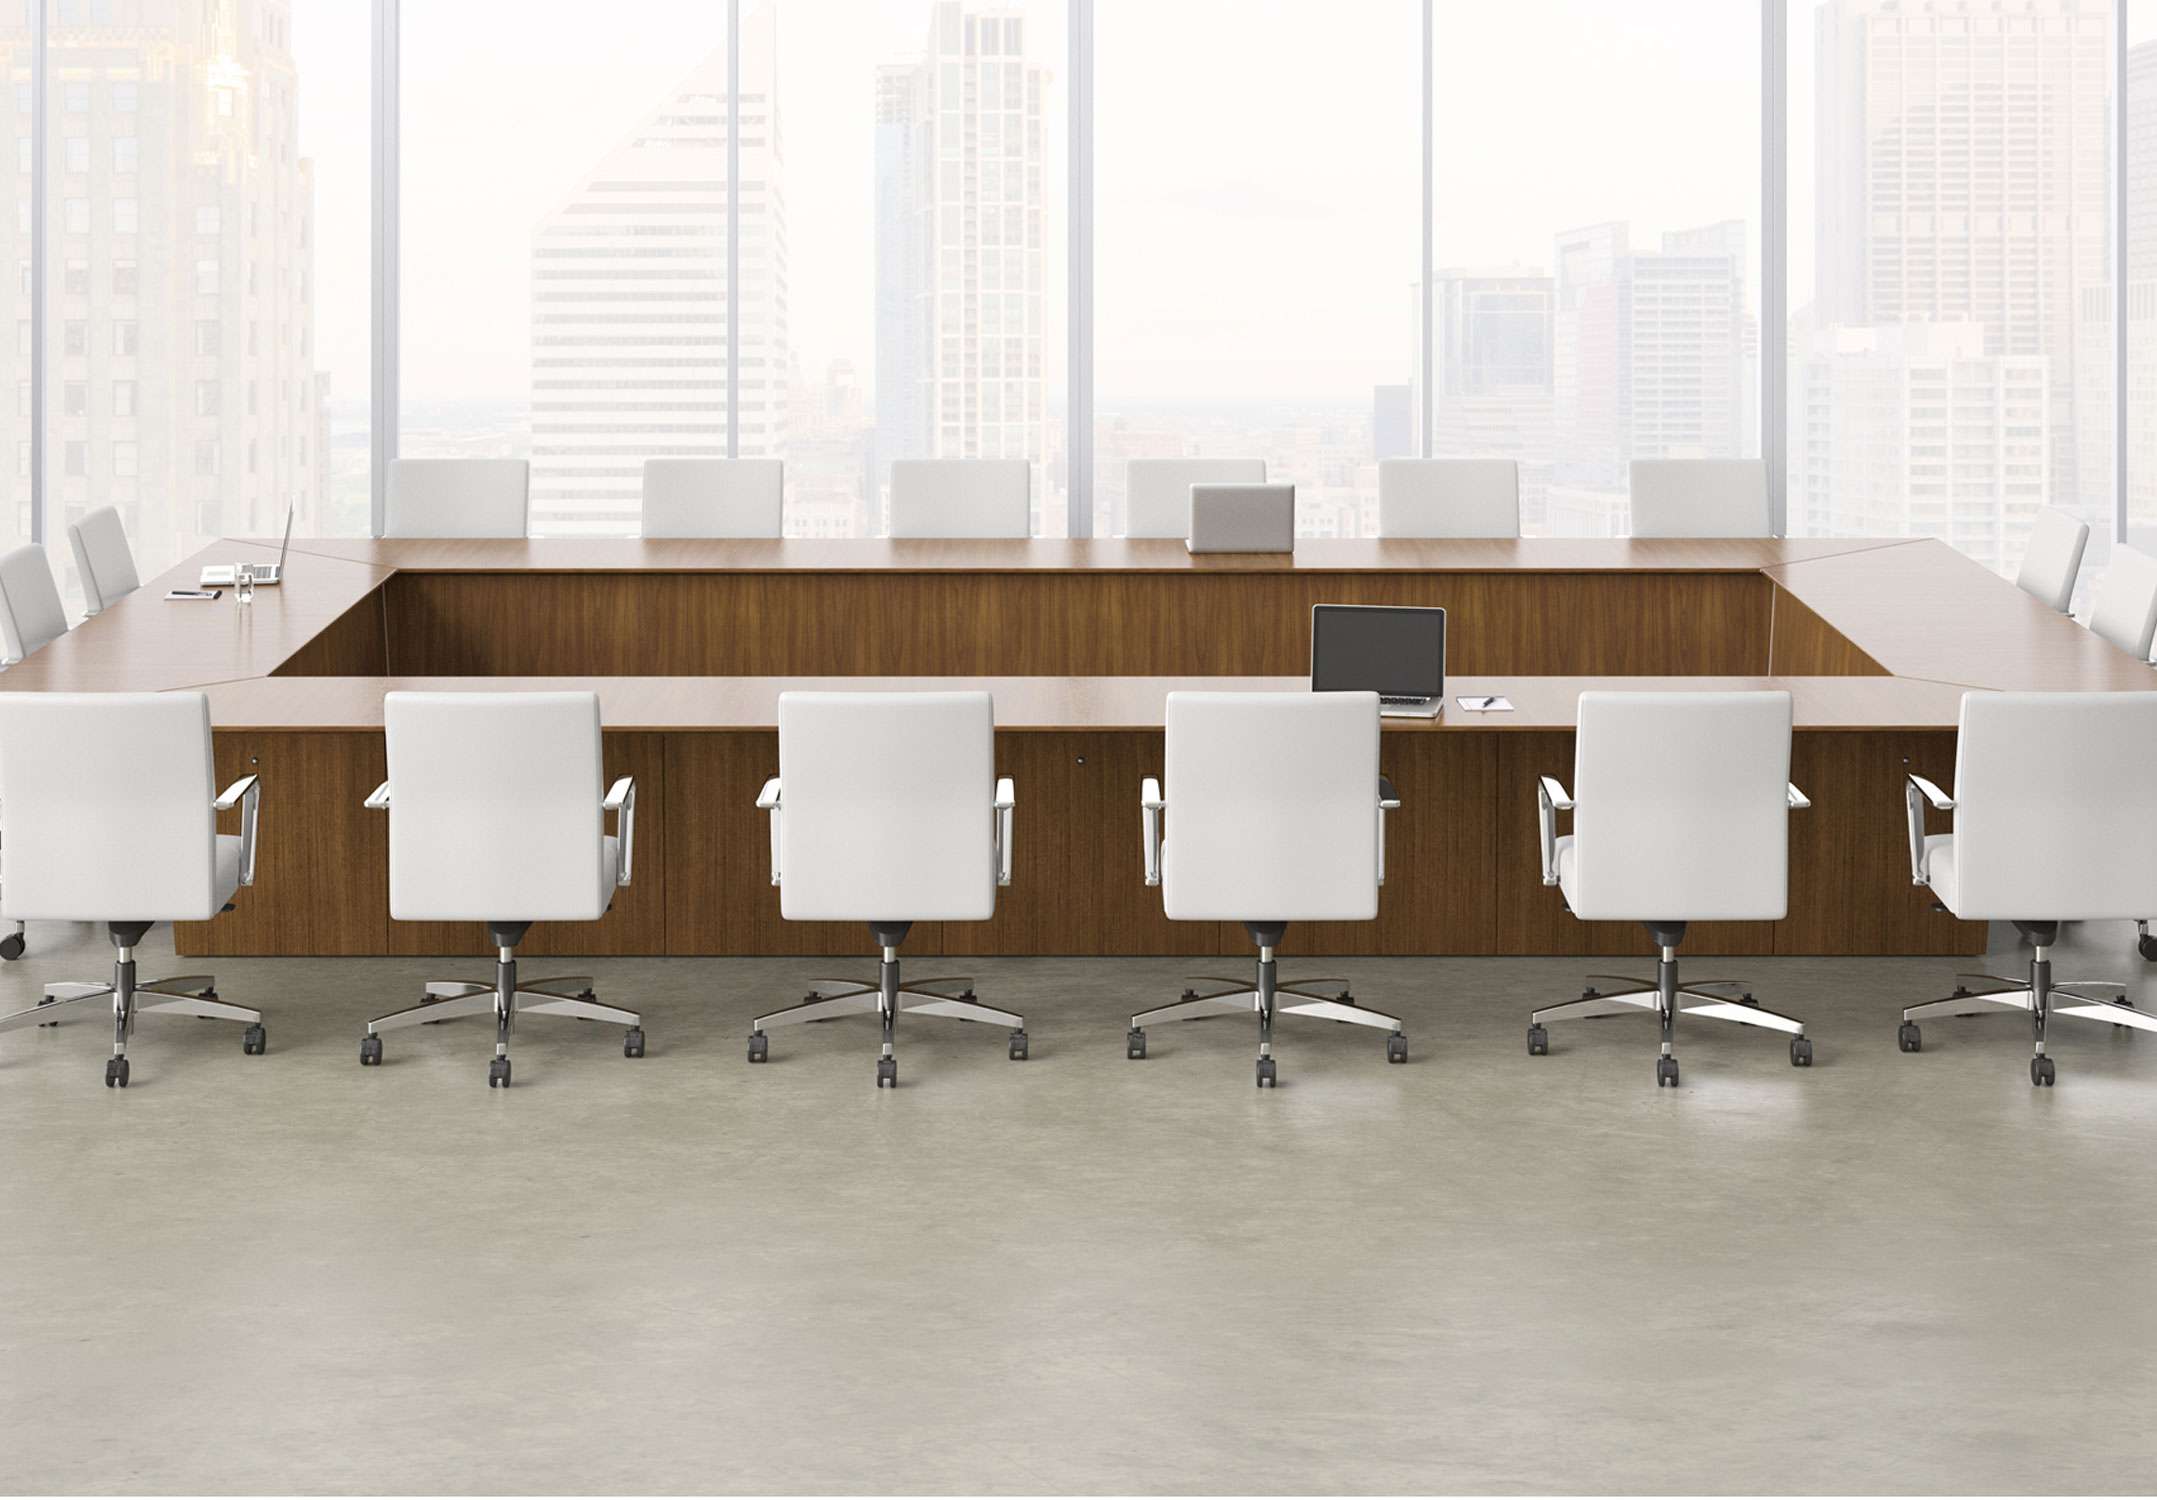 Impress Board Members With These Five Modern Conference Room Designs -  Modern Office Furniture